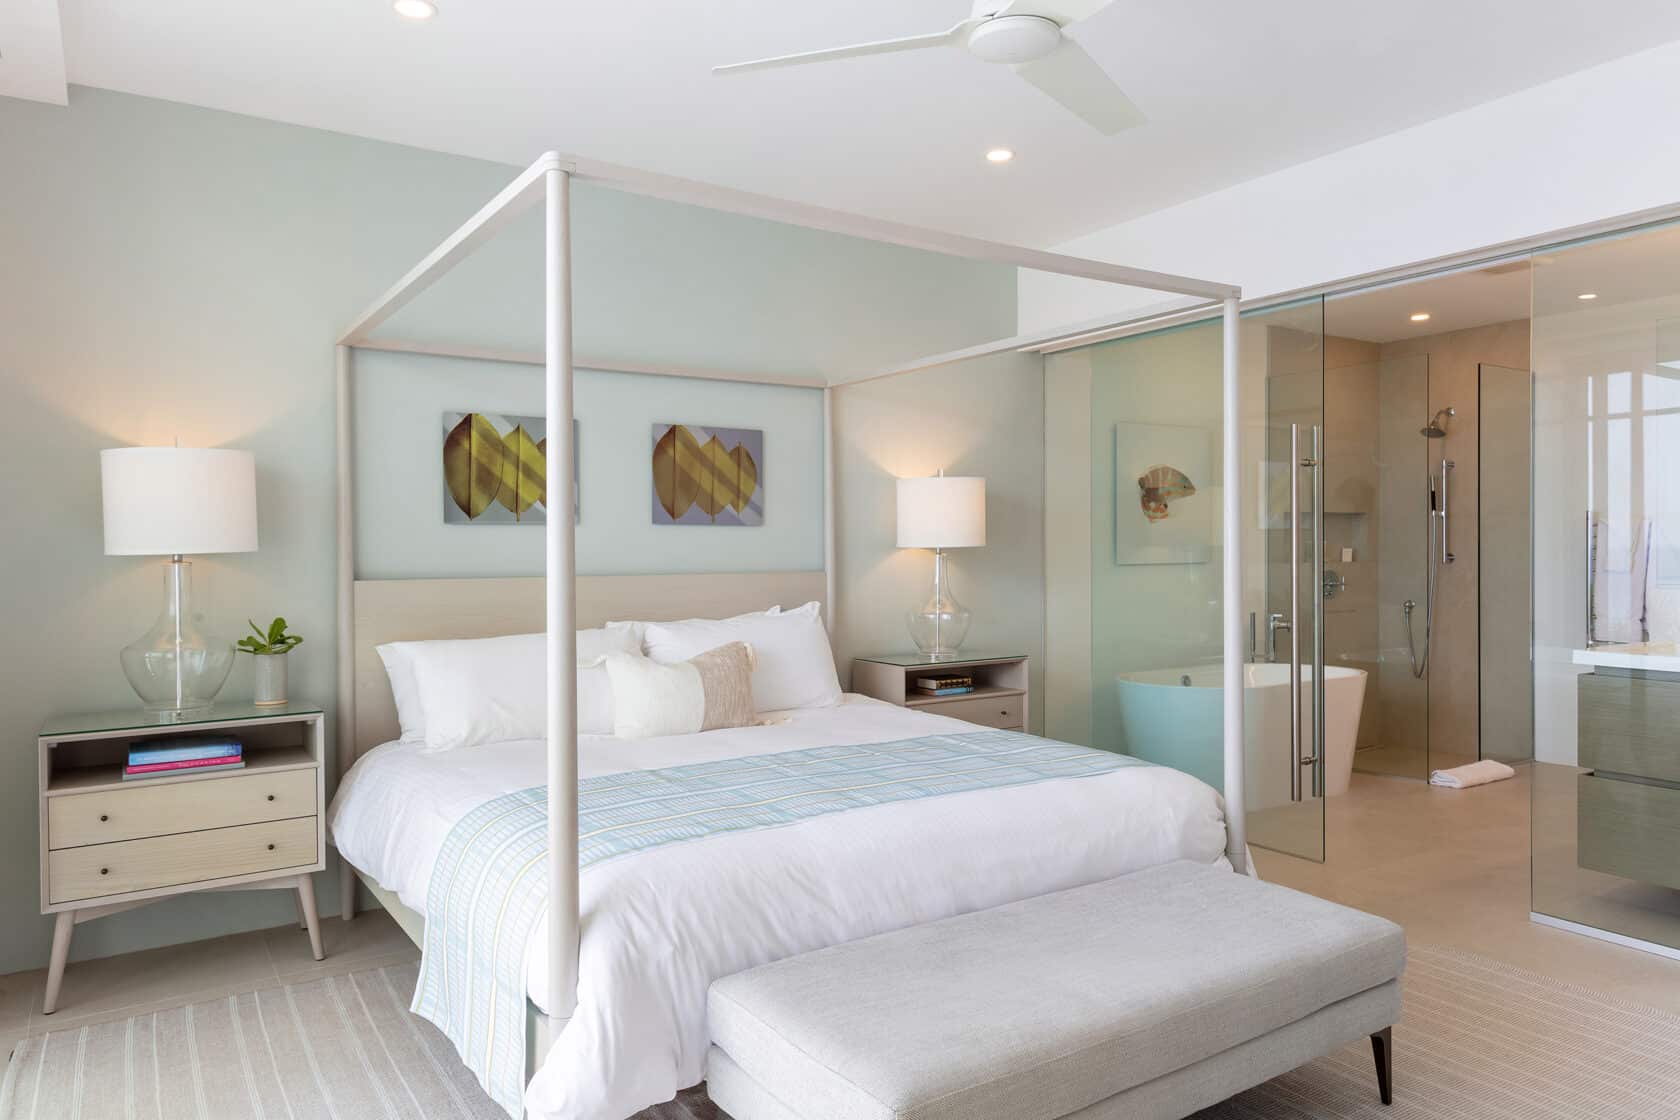 A bedroom with a canopy bed and glass shower is perfect for a cozy retreat in Bermuda.